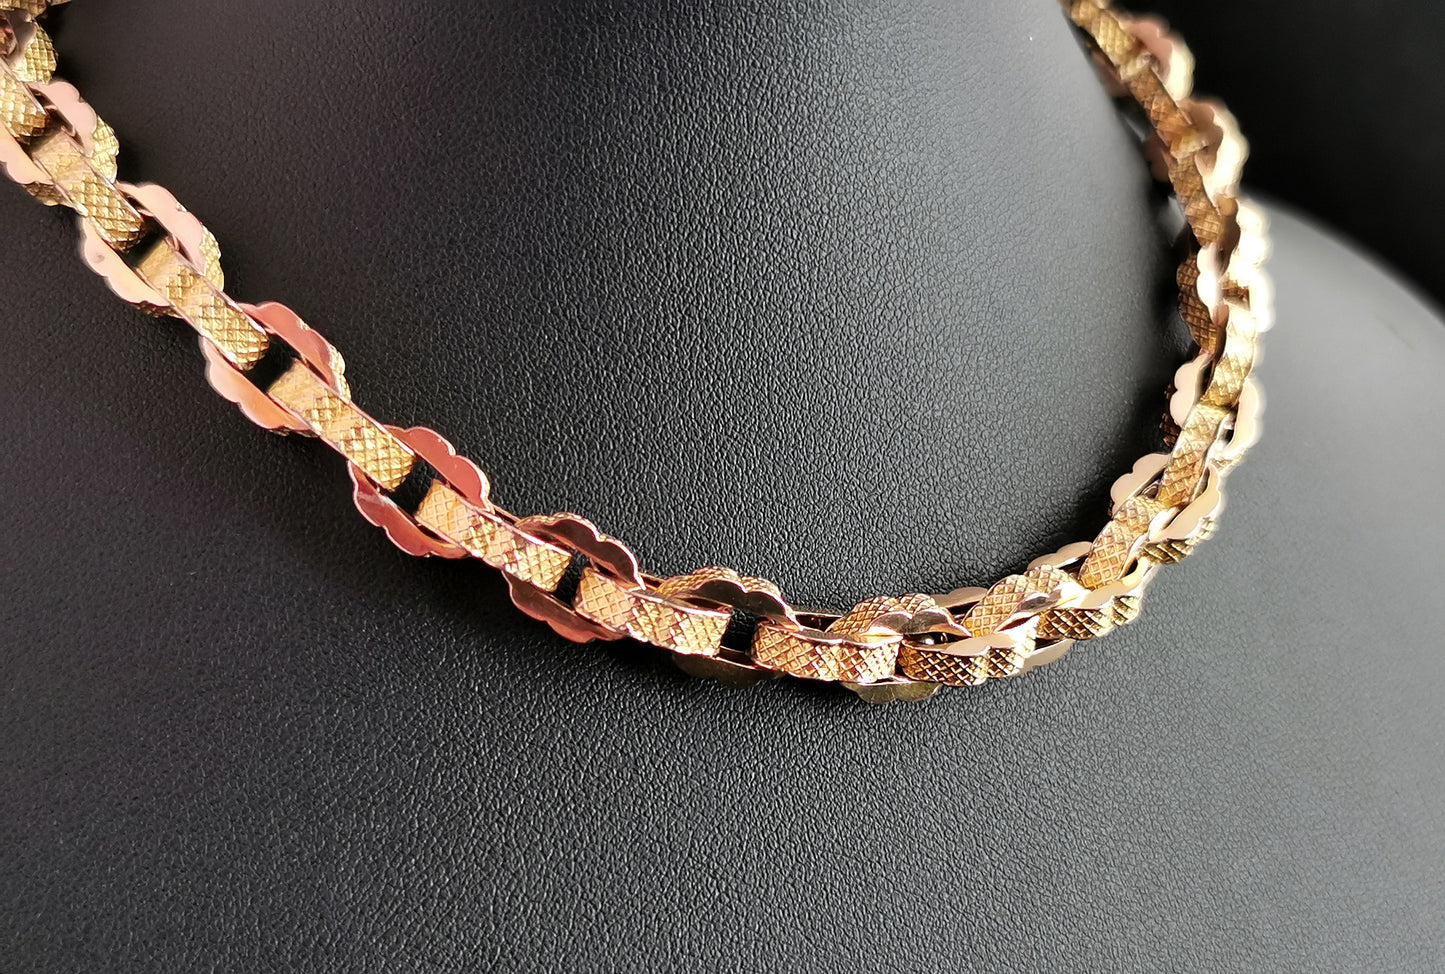 Antique 9ct yellow gold fancy link Albert chain, watch chain necklace, Horseshoe swivel fob